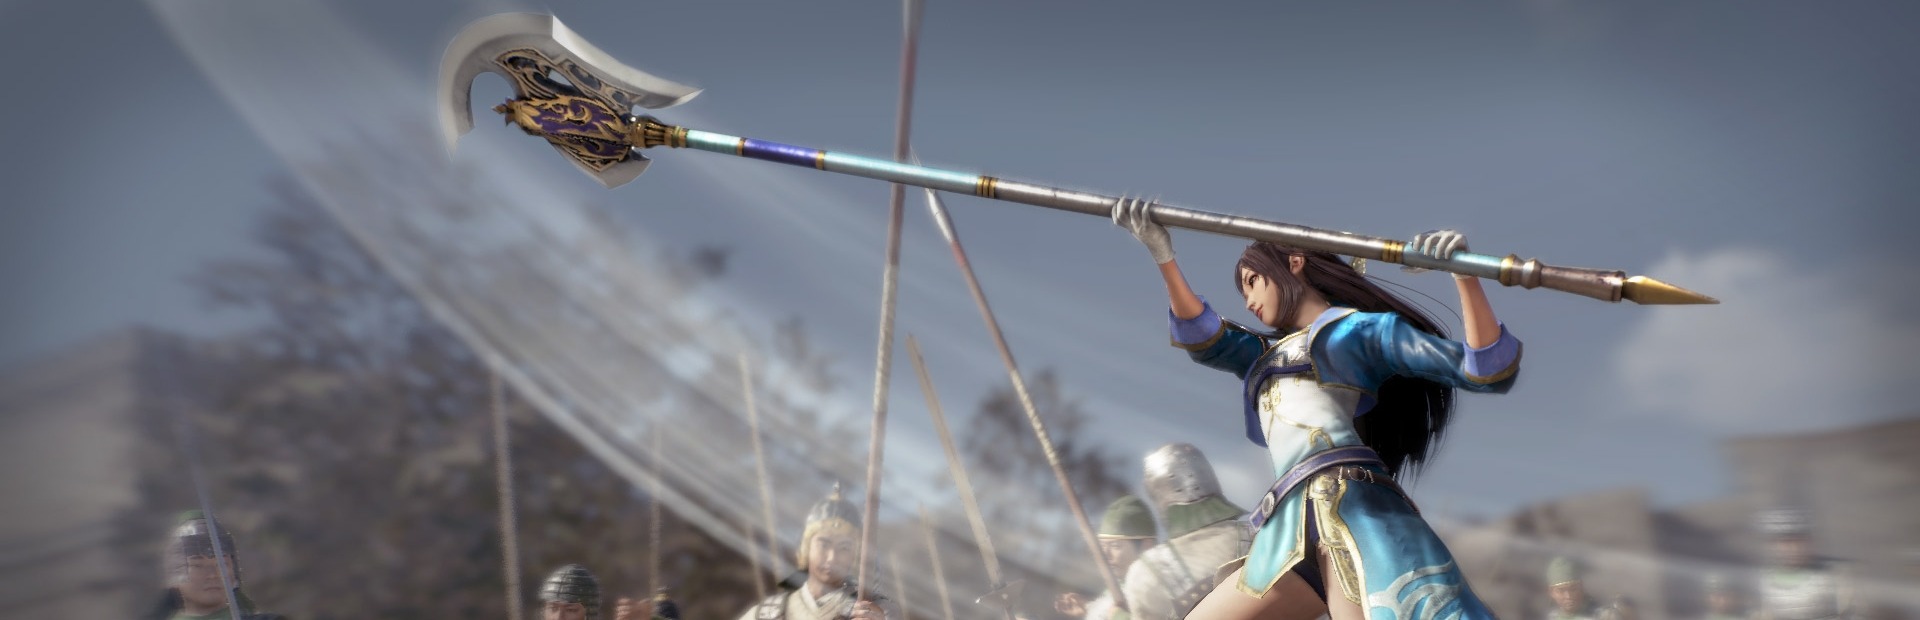 Banner Dynasty Warriors 9: Special Weapon Edition